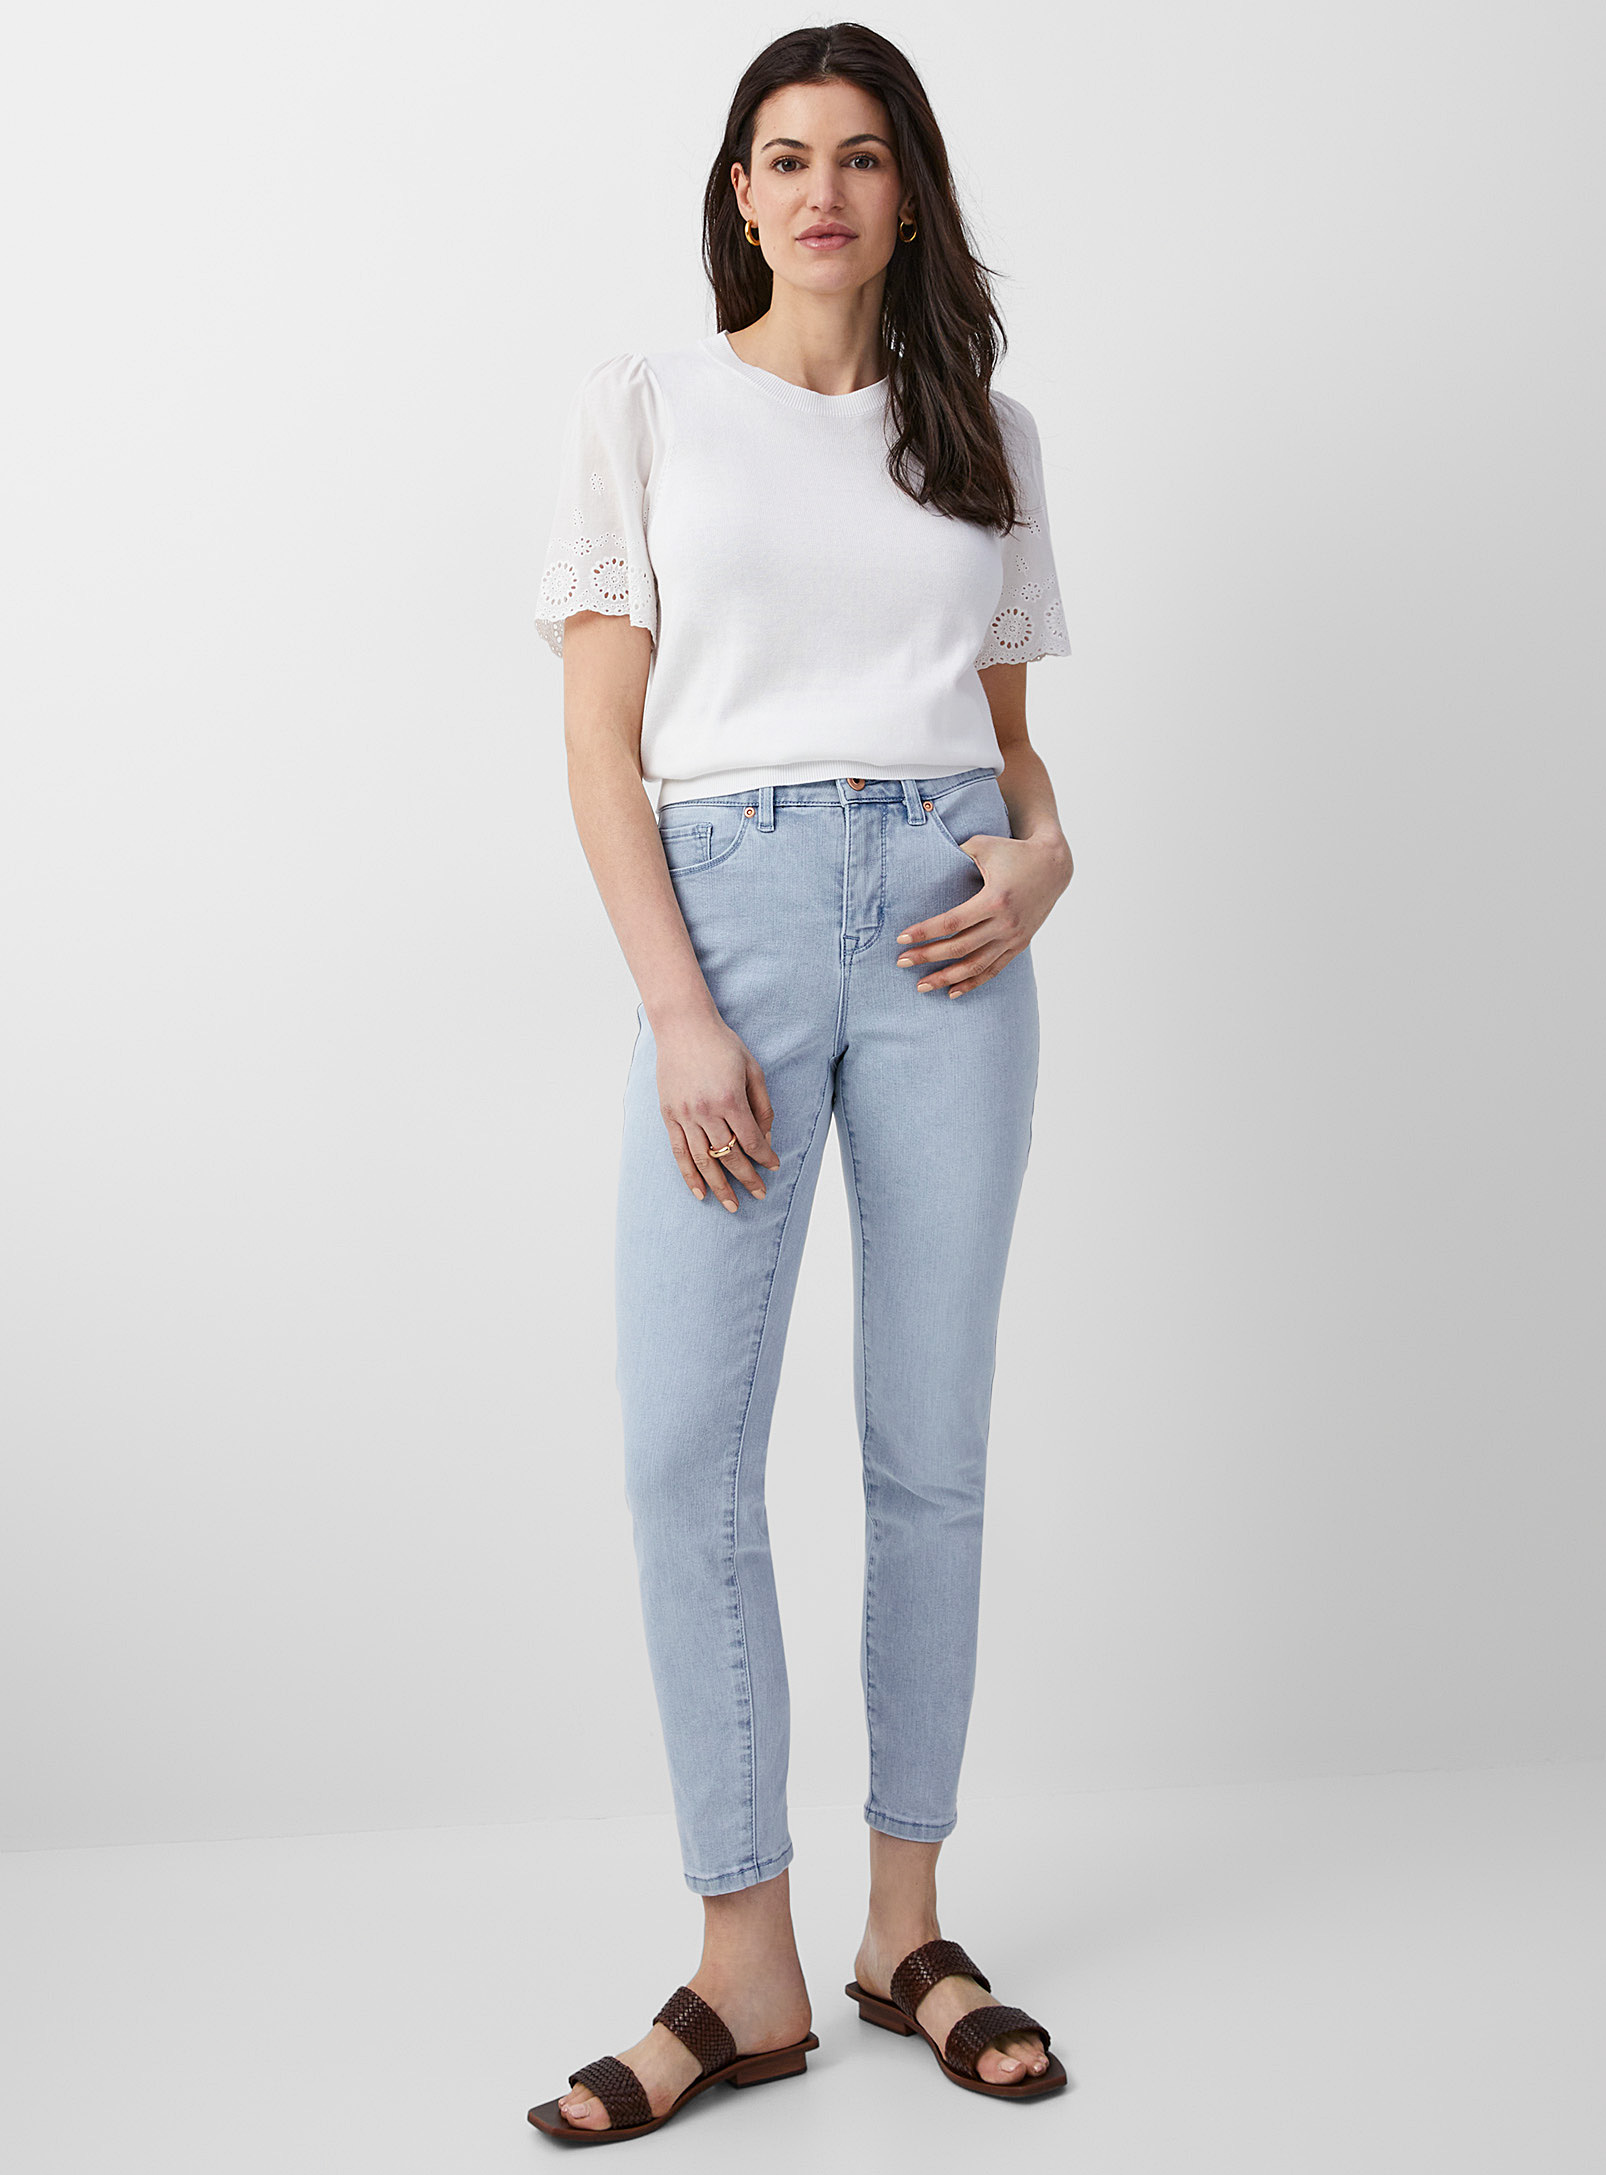 Contemporaine Straight And Slim Stretch Jean In Teal